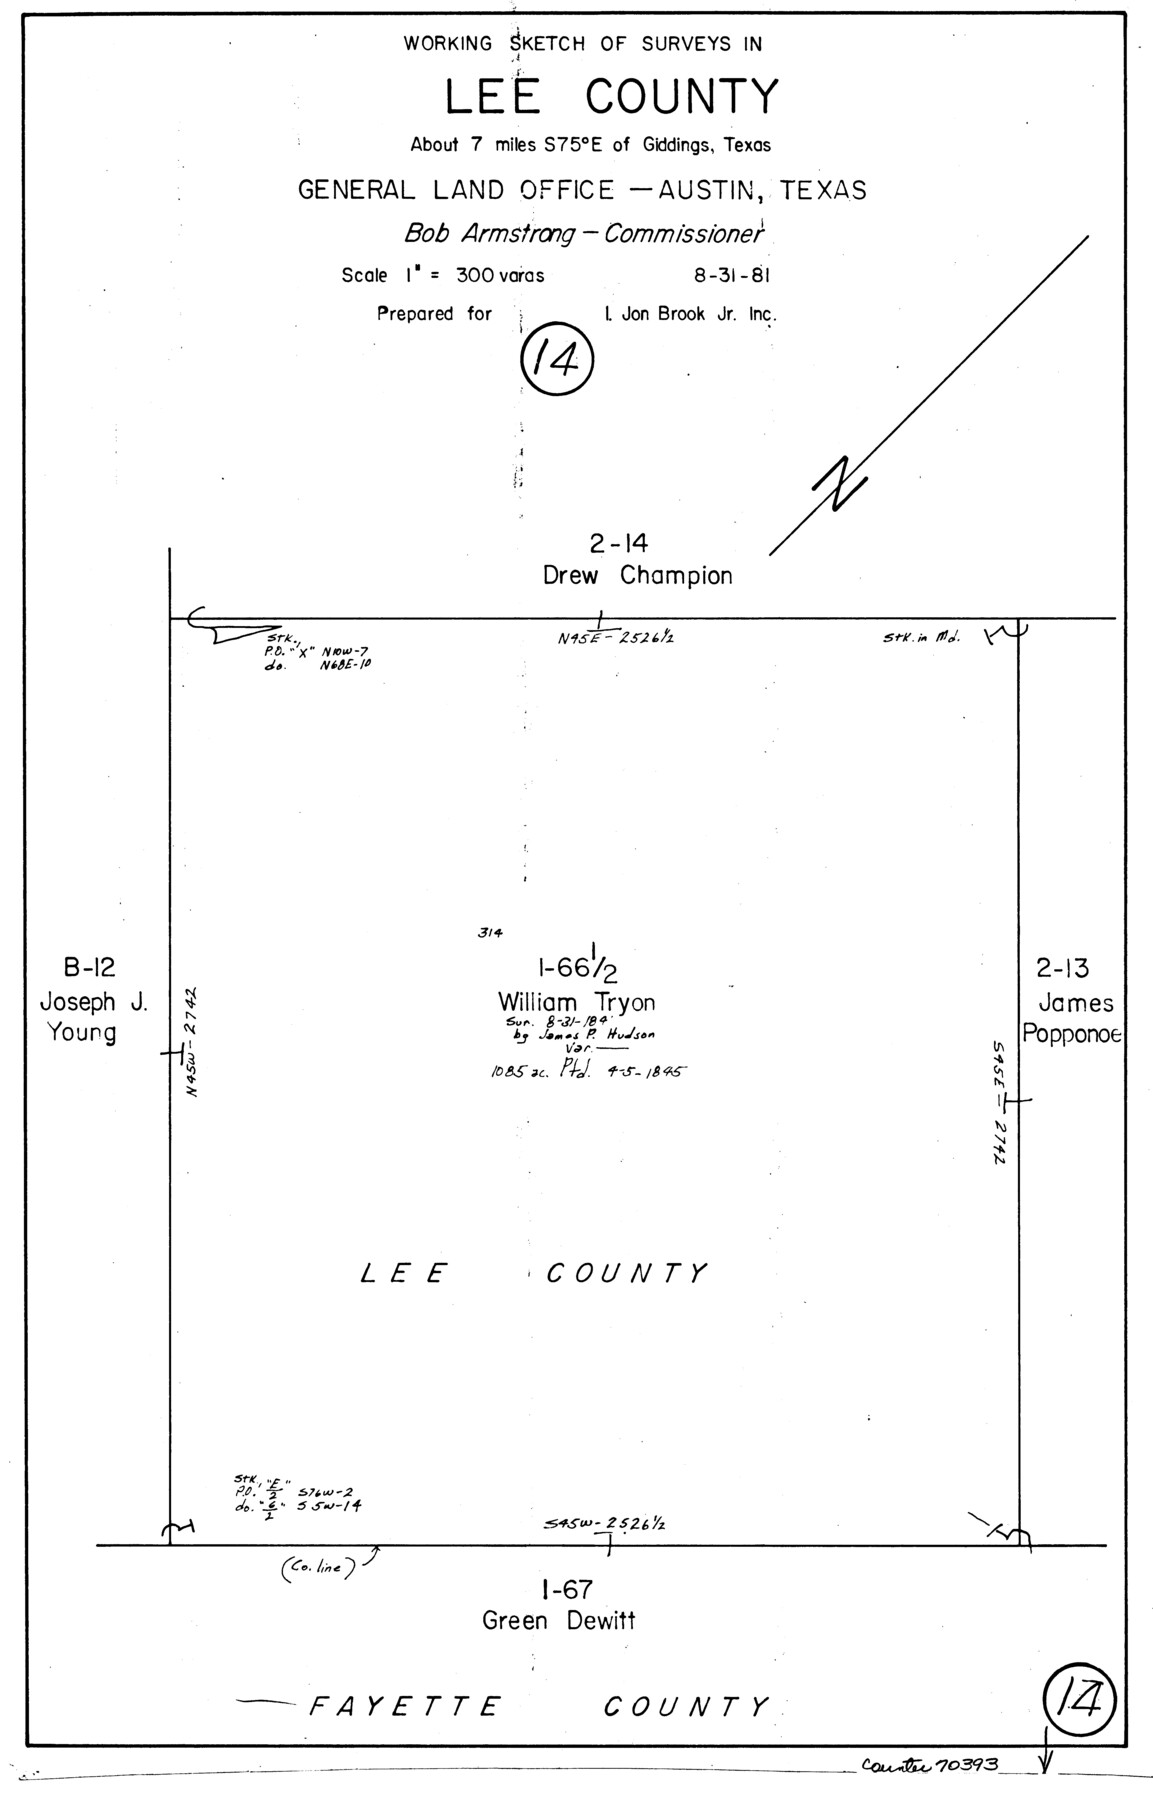 70393, Lee County Working Sketch 14, General Map Collection